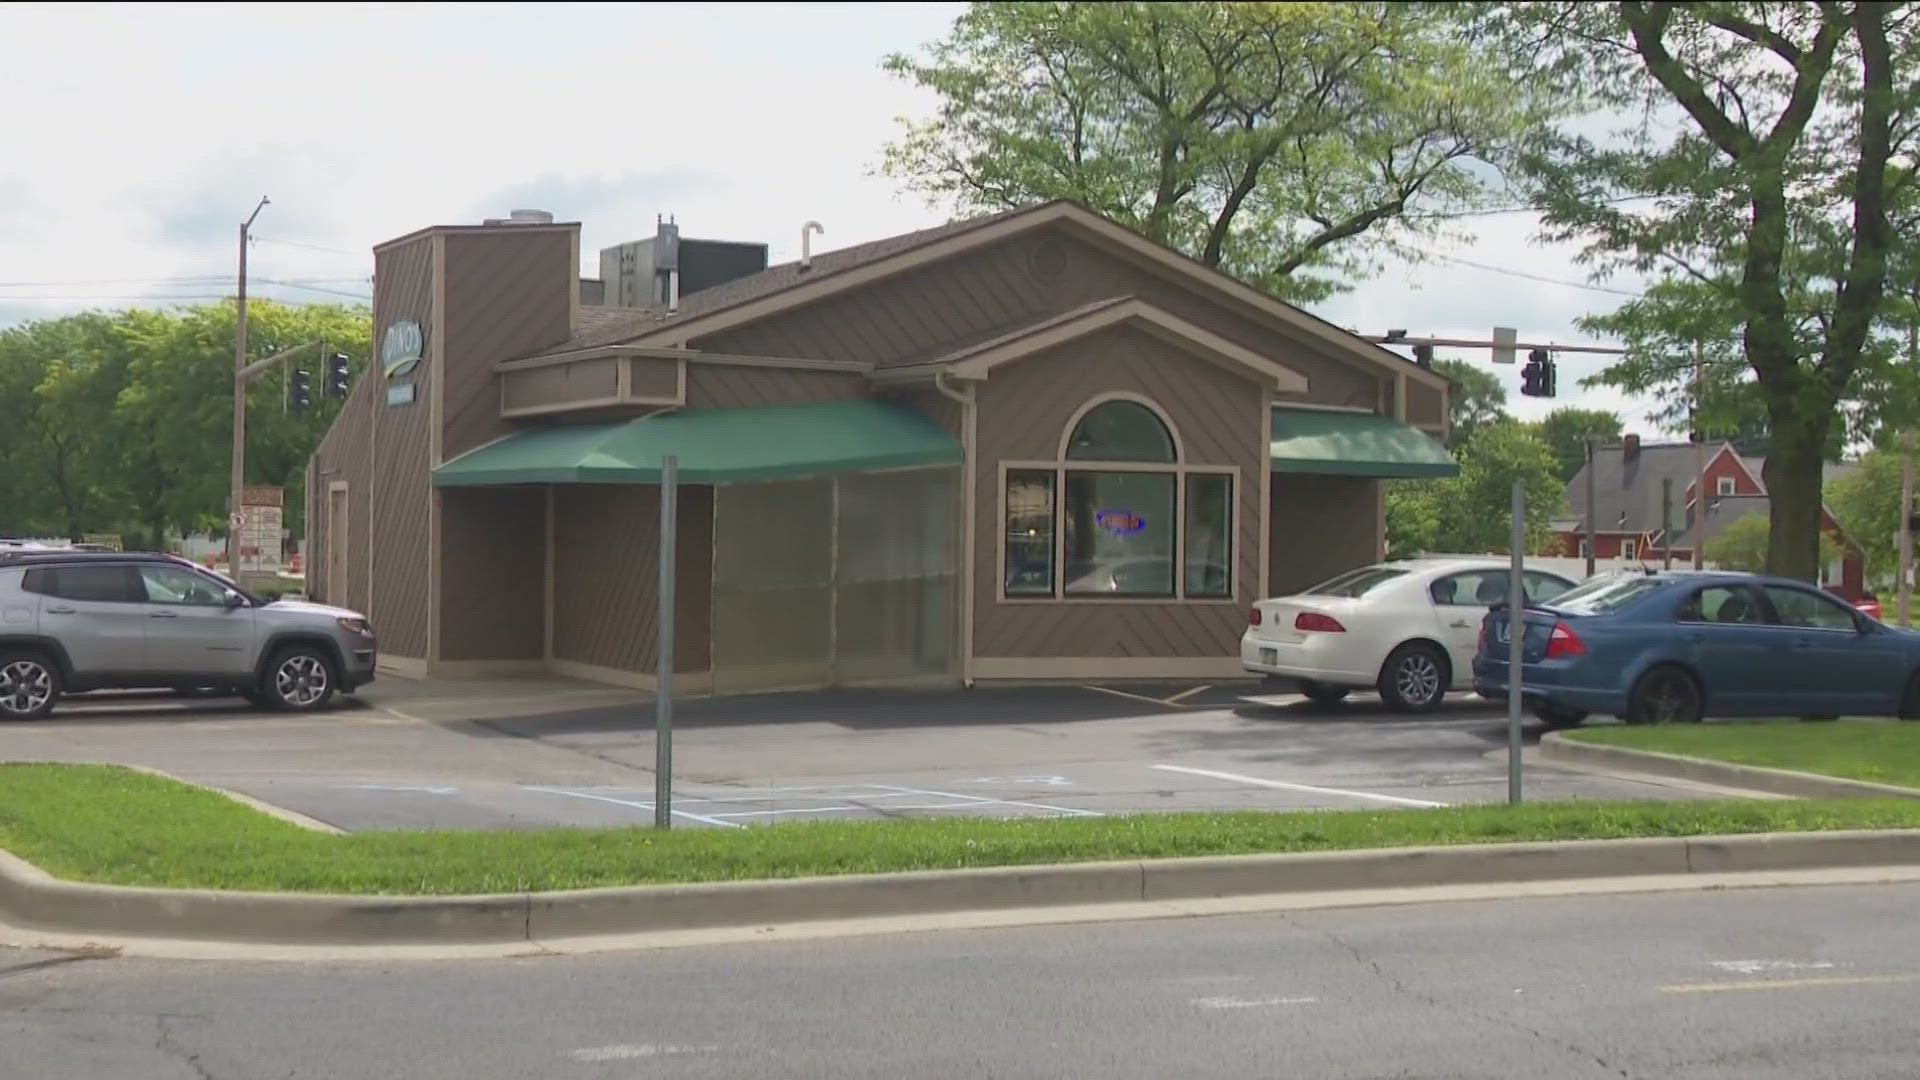 The Maumee staple was slated to move to another spot in the same plaza earlier this year.